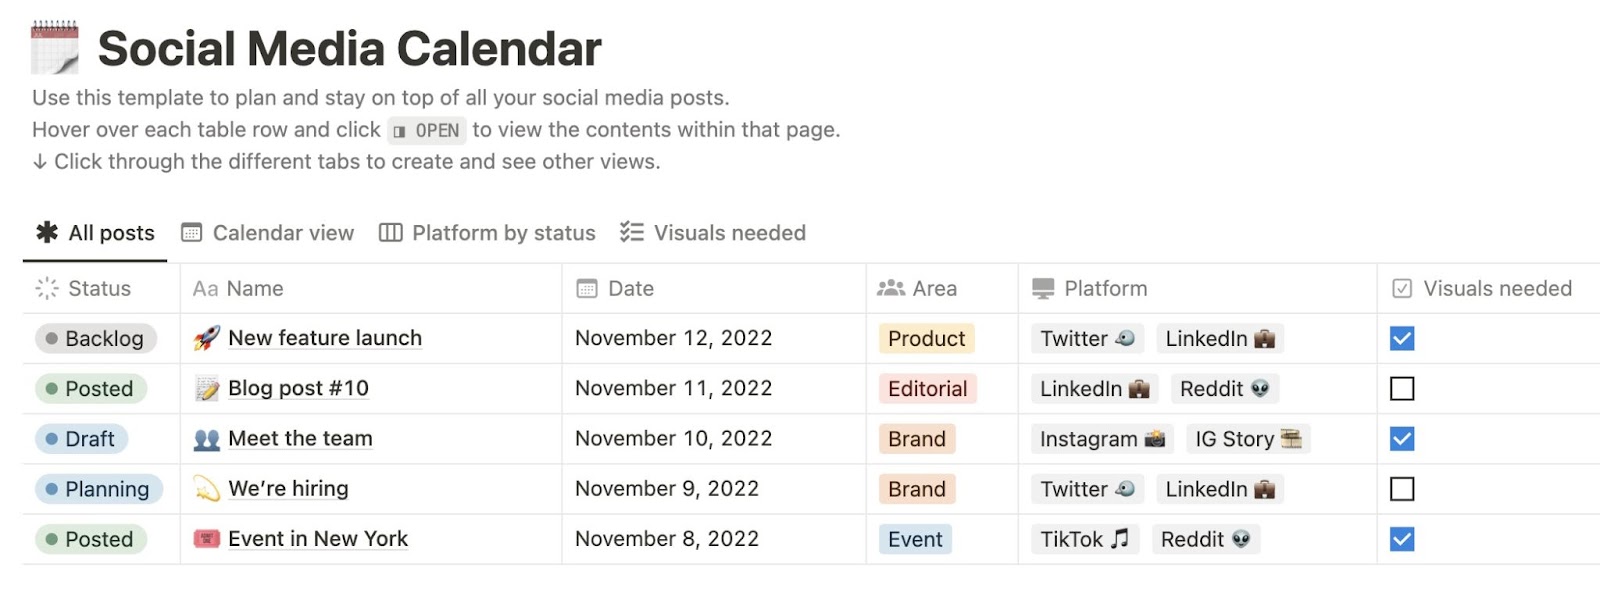 Social media calendar template on Notion with sections for post name, status, date, and platforms to be posted on.